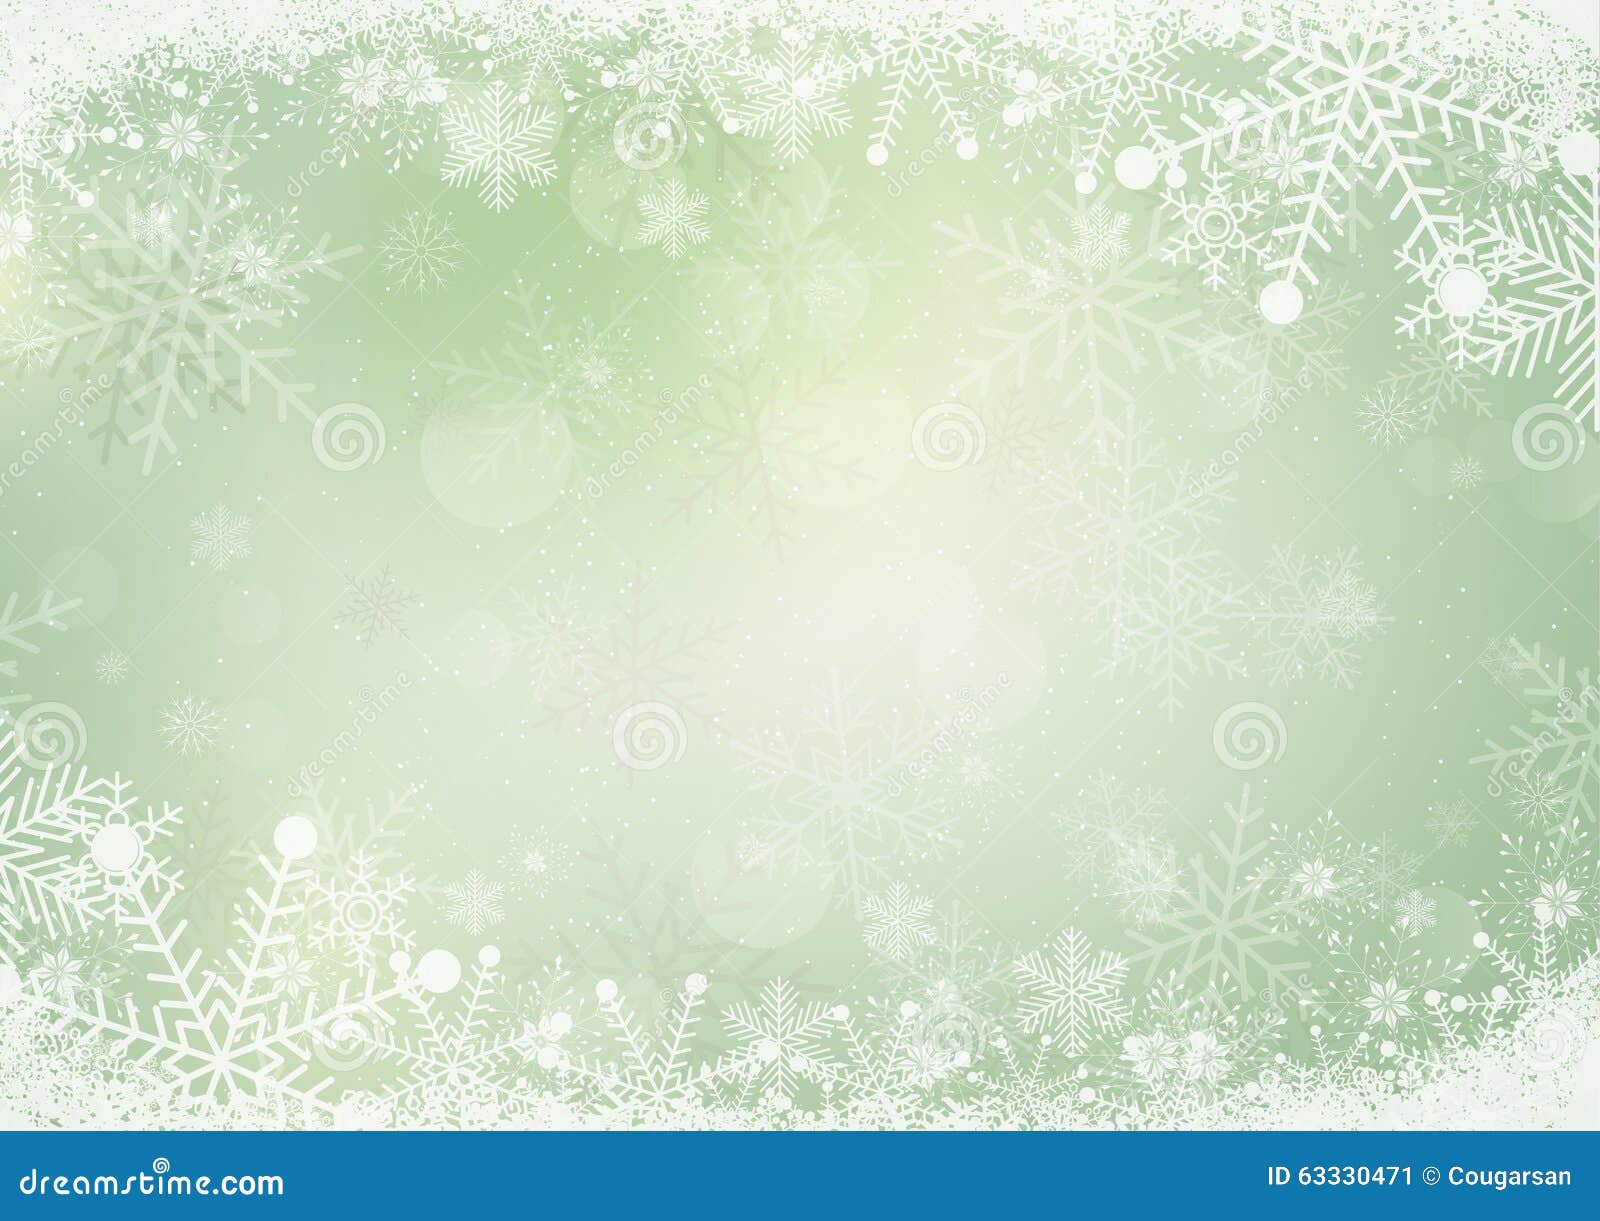 Green Winter Snow Holiday Paper Background Stock Vector - Illustration of  border, mother: 63330471